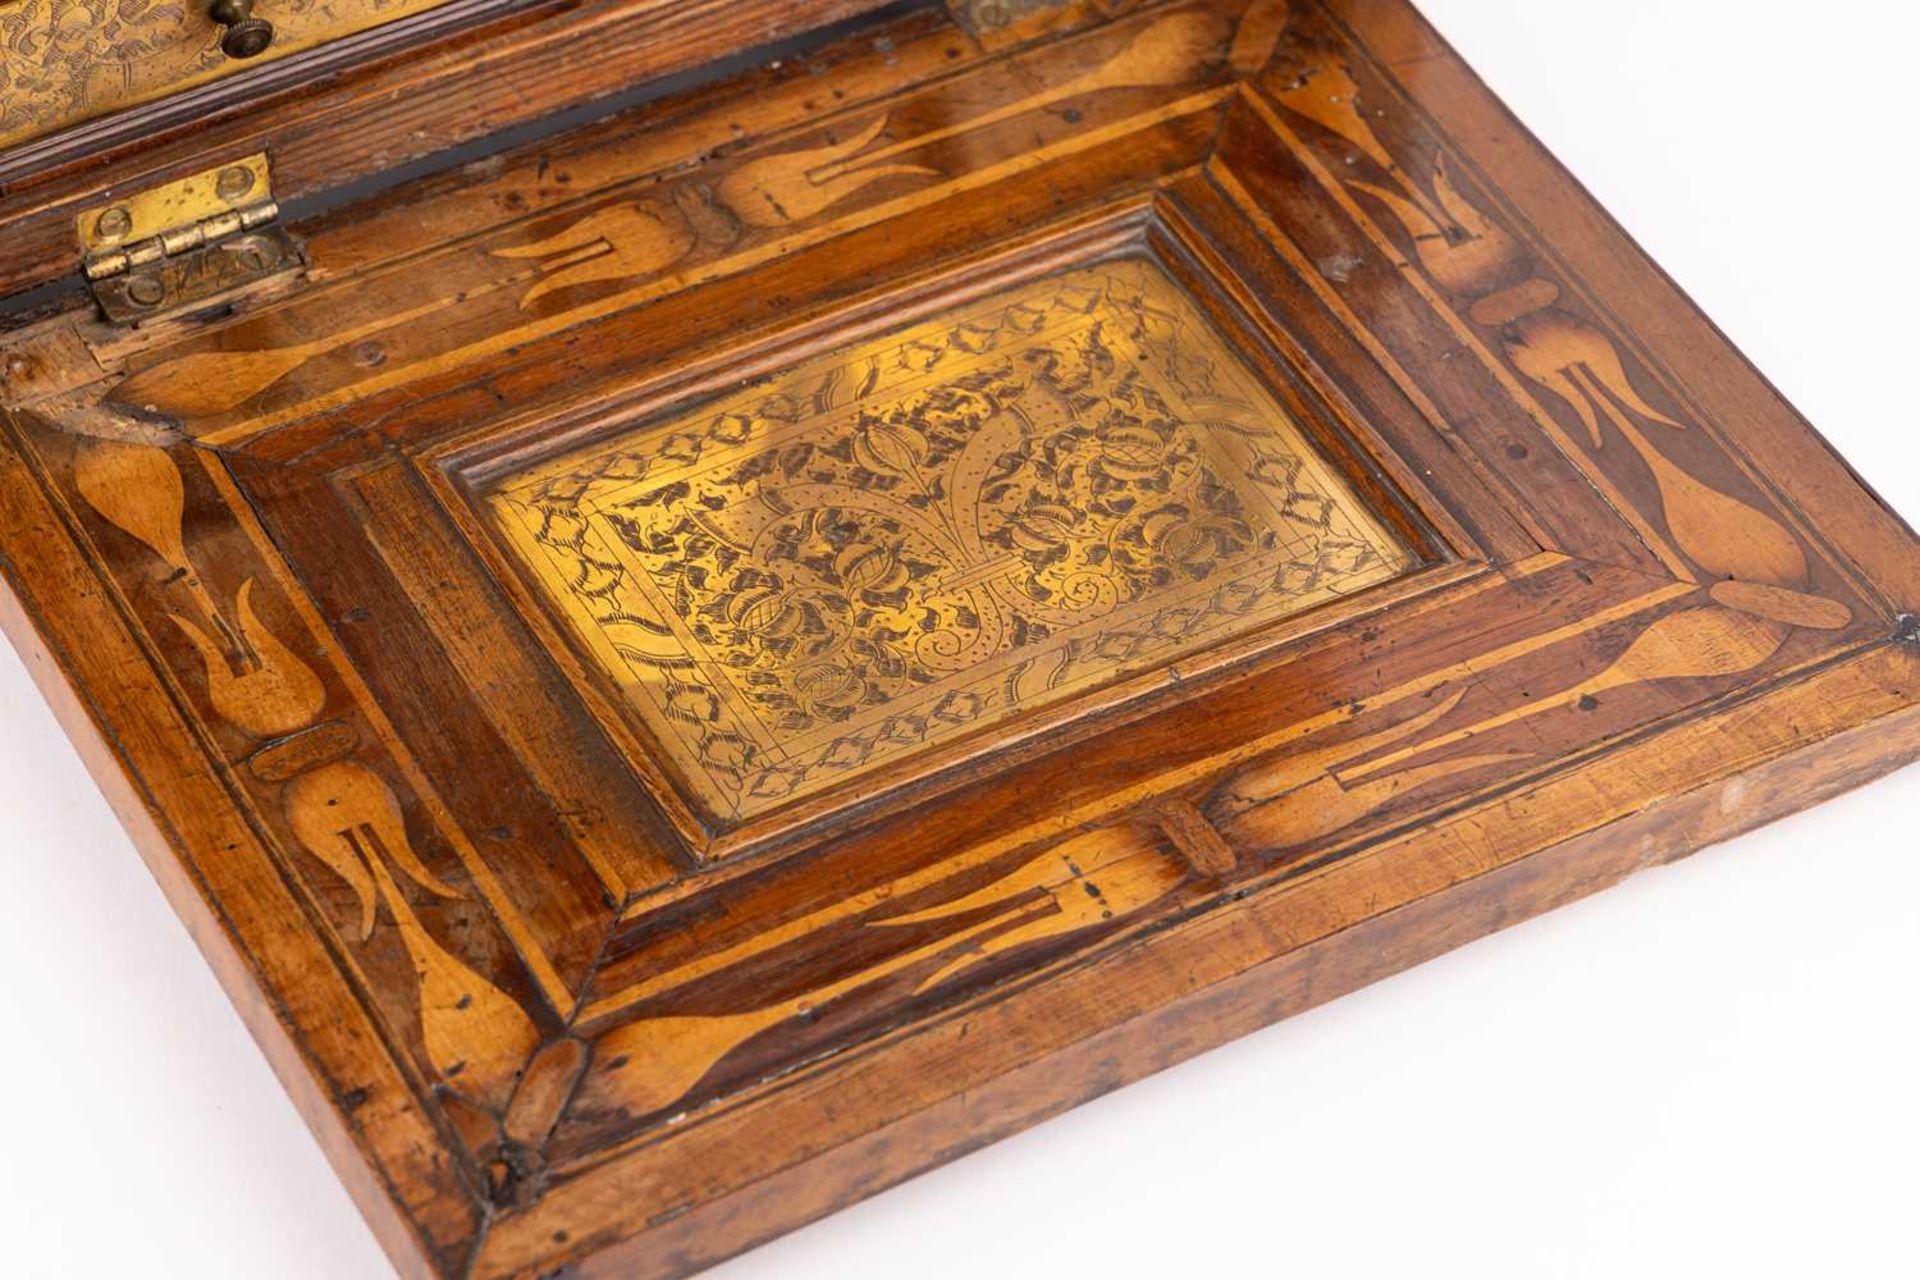 An early to mid 17th century South German Augsburg-type walnut table cabinet, the exterior with simp - Image 11 of 15